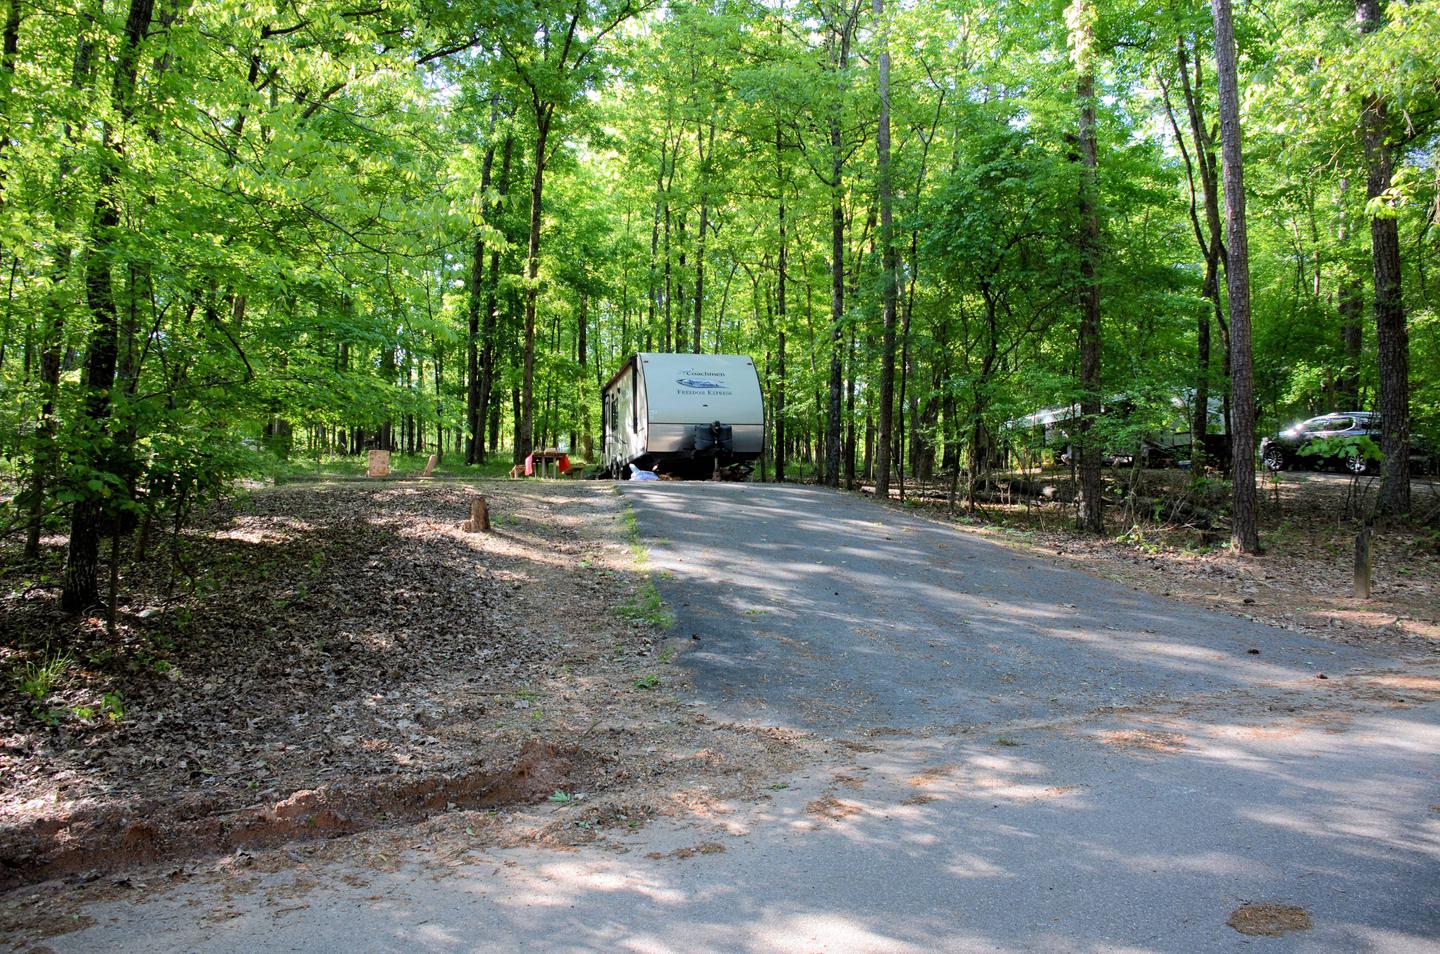 Entrance angle, driveway slope, awning clearance.McKinney Campground, Campsite #3.